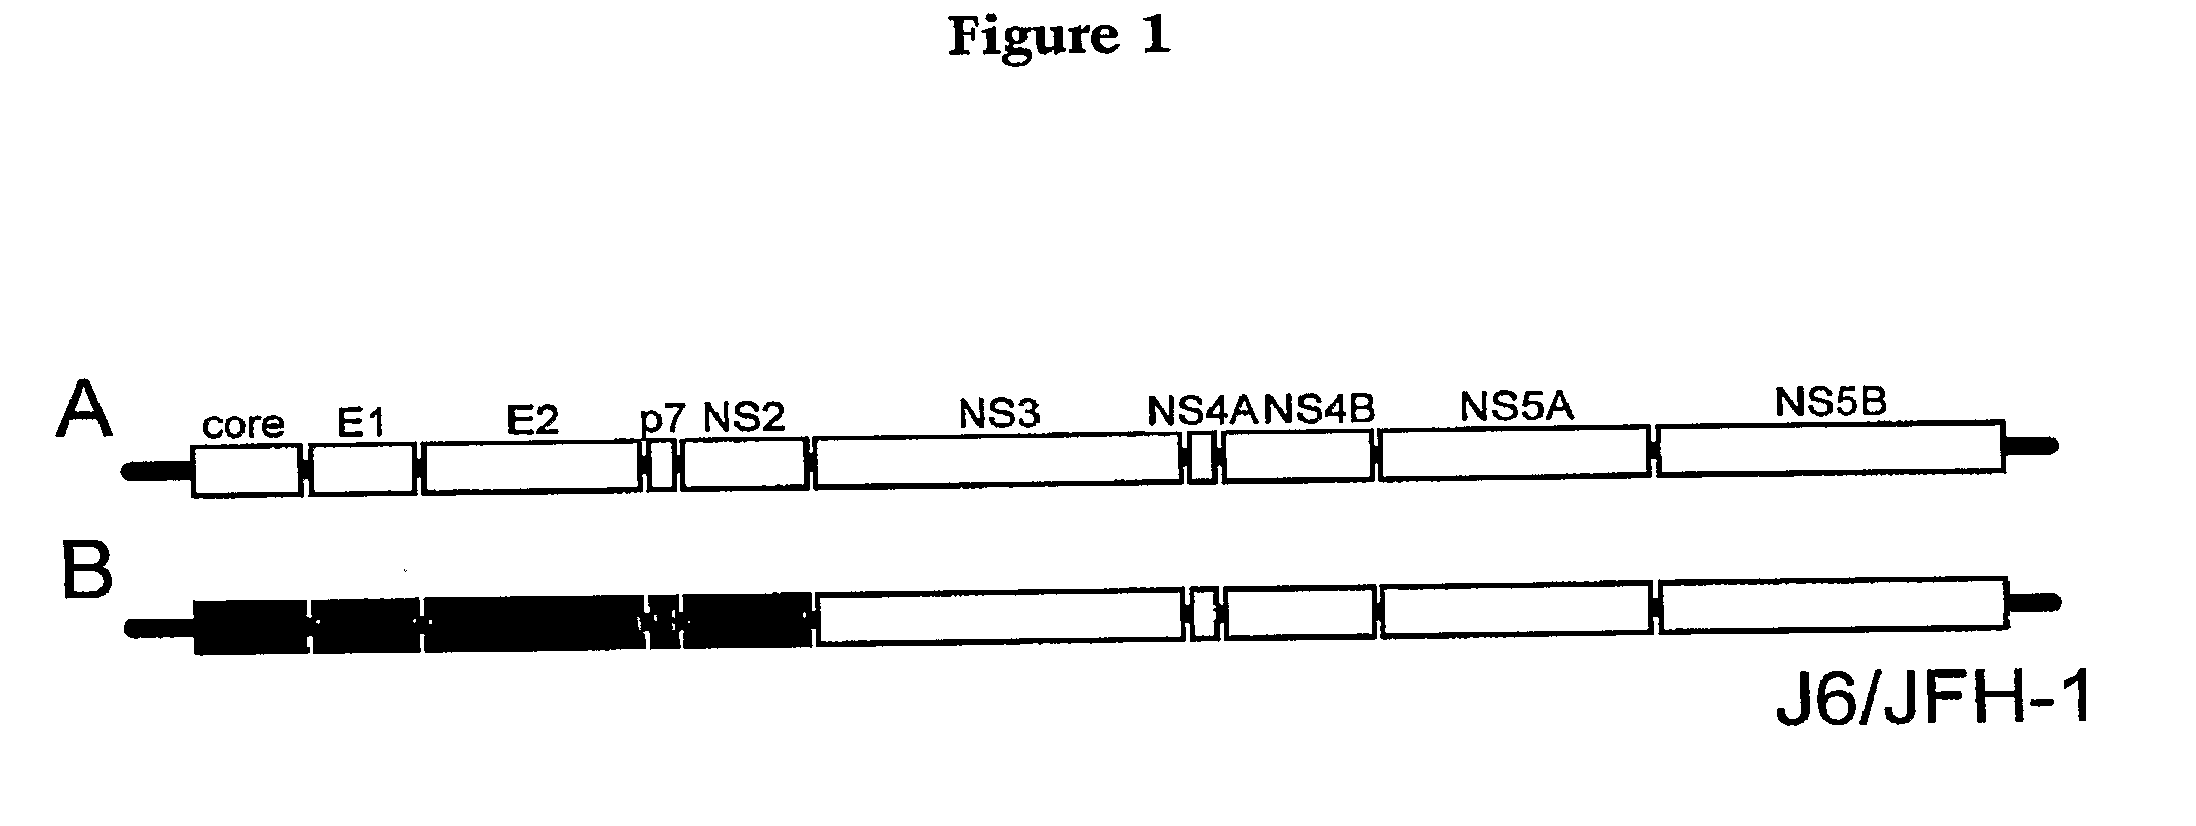 Hcv coreceptor and methods of use thereof